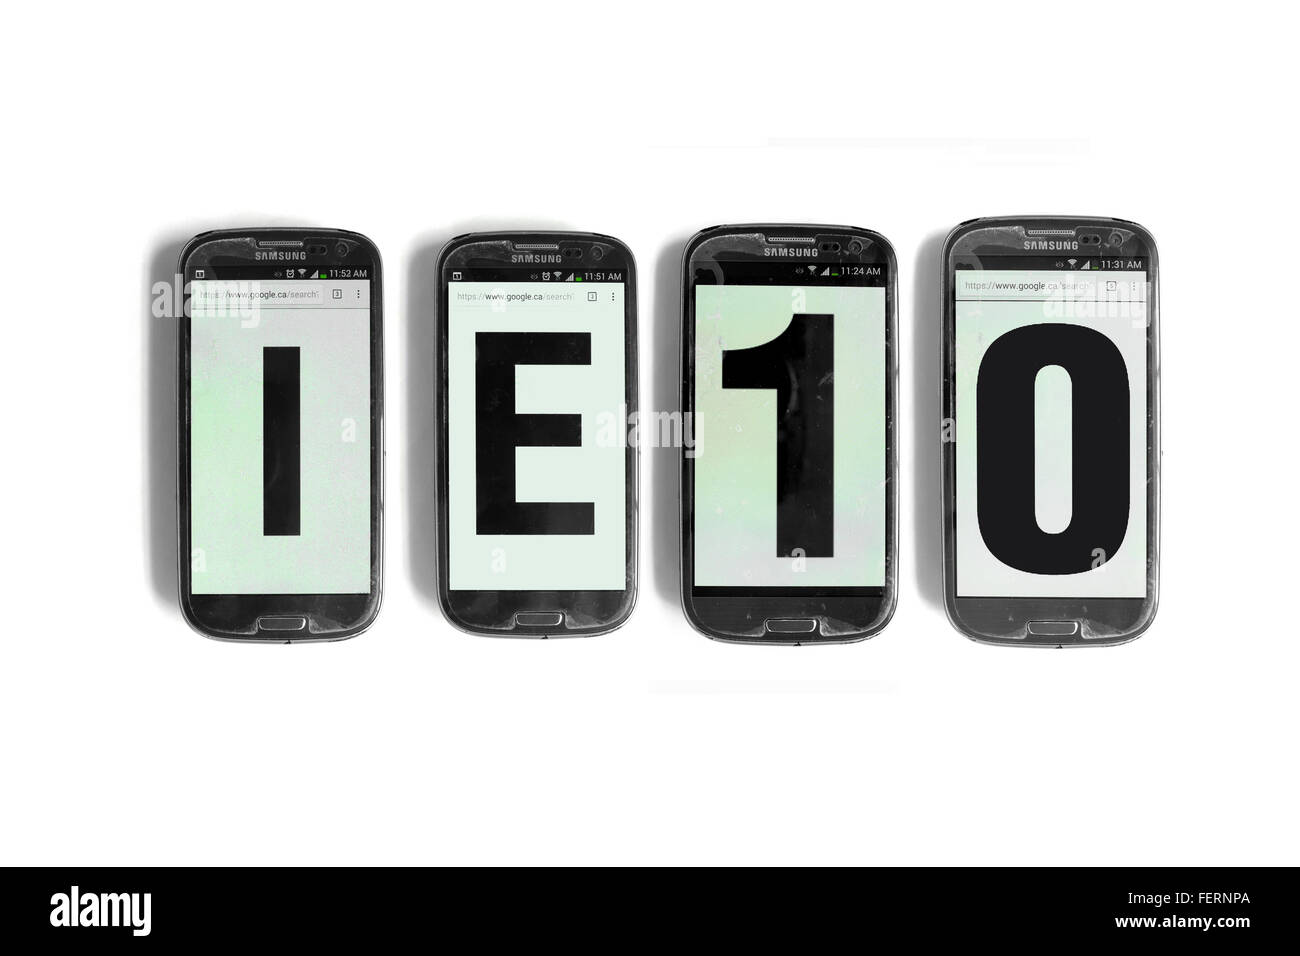 IE10 on the screens of smartphones photographed against a  white background. Stock Photo